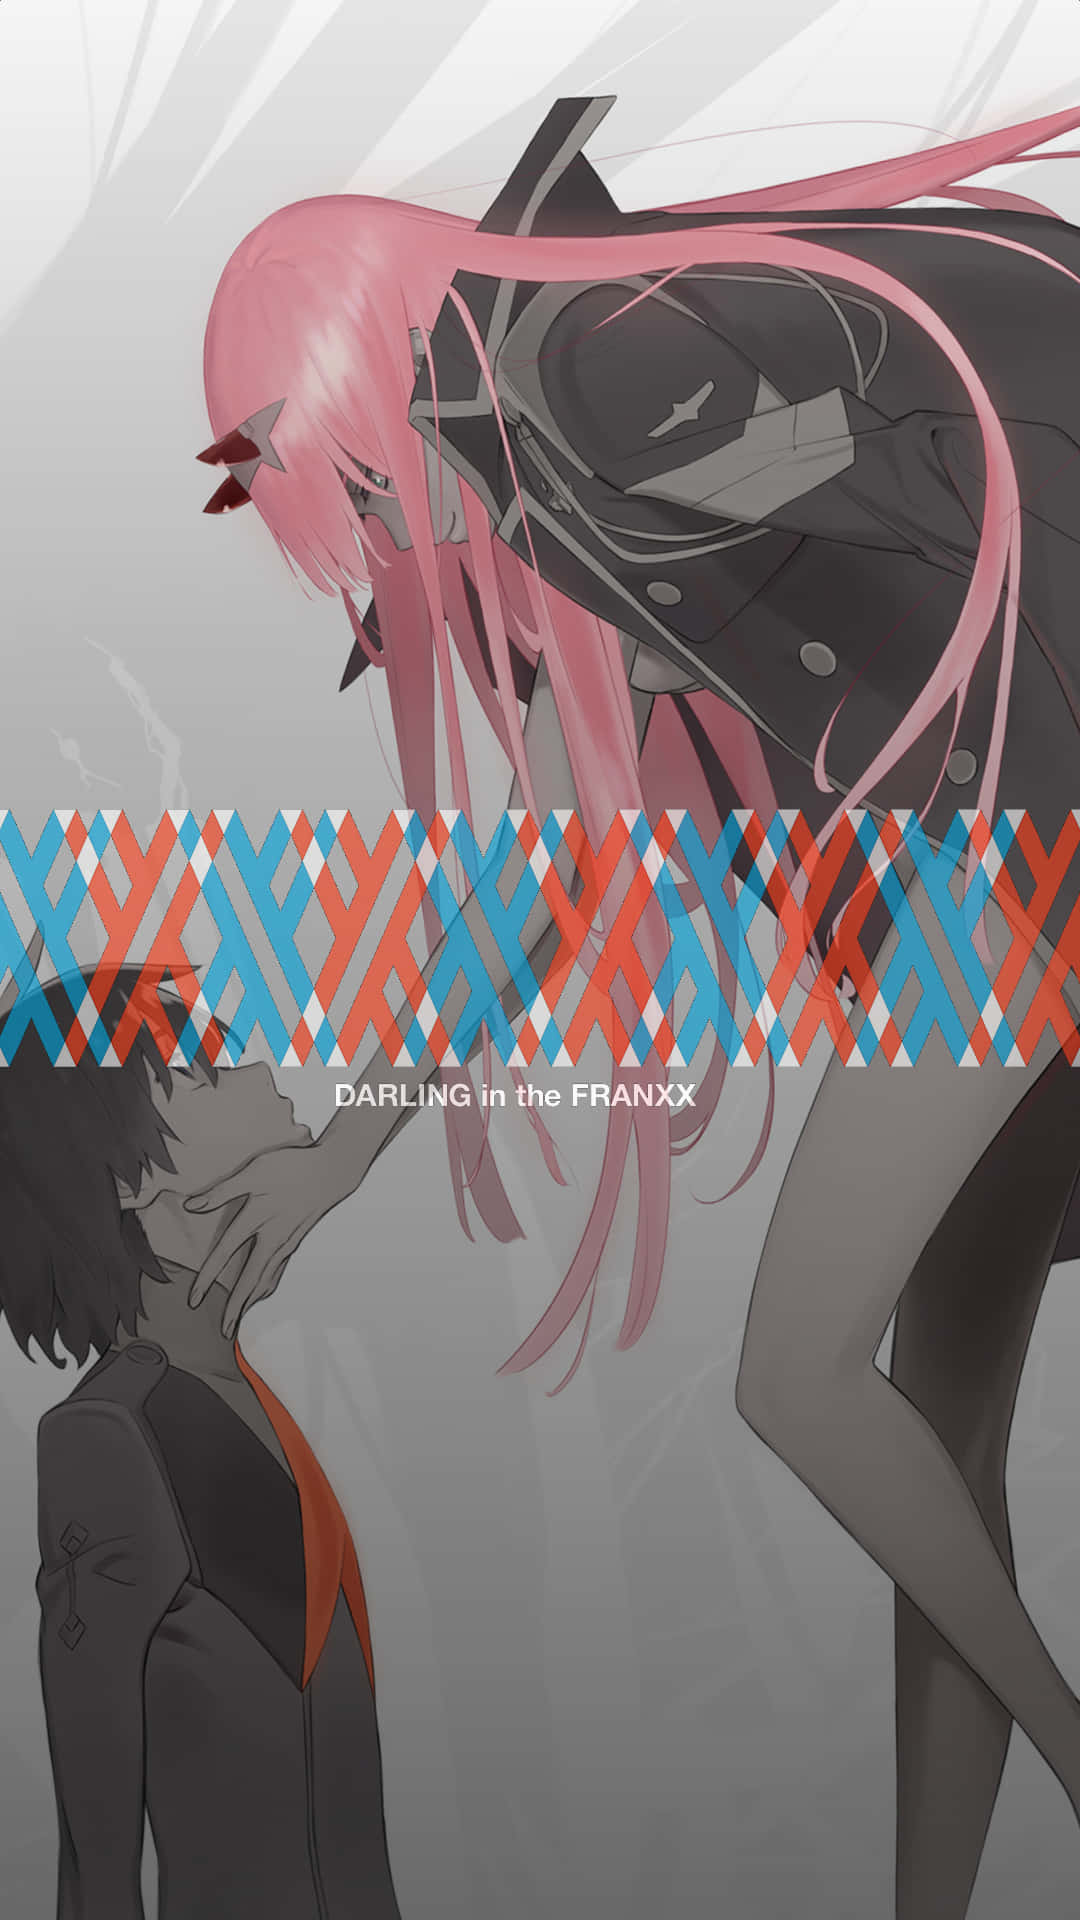 "enjoy The Story Of Darling In The Franxx With This Phone!" Wallpaper